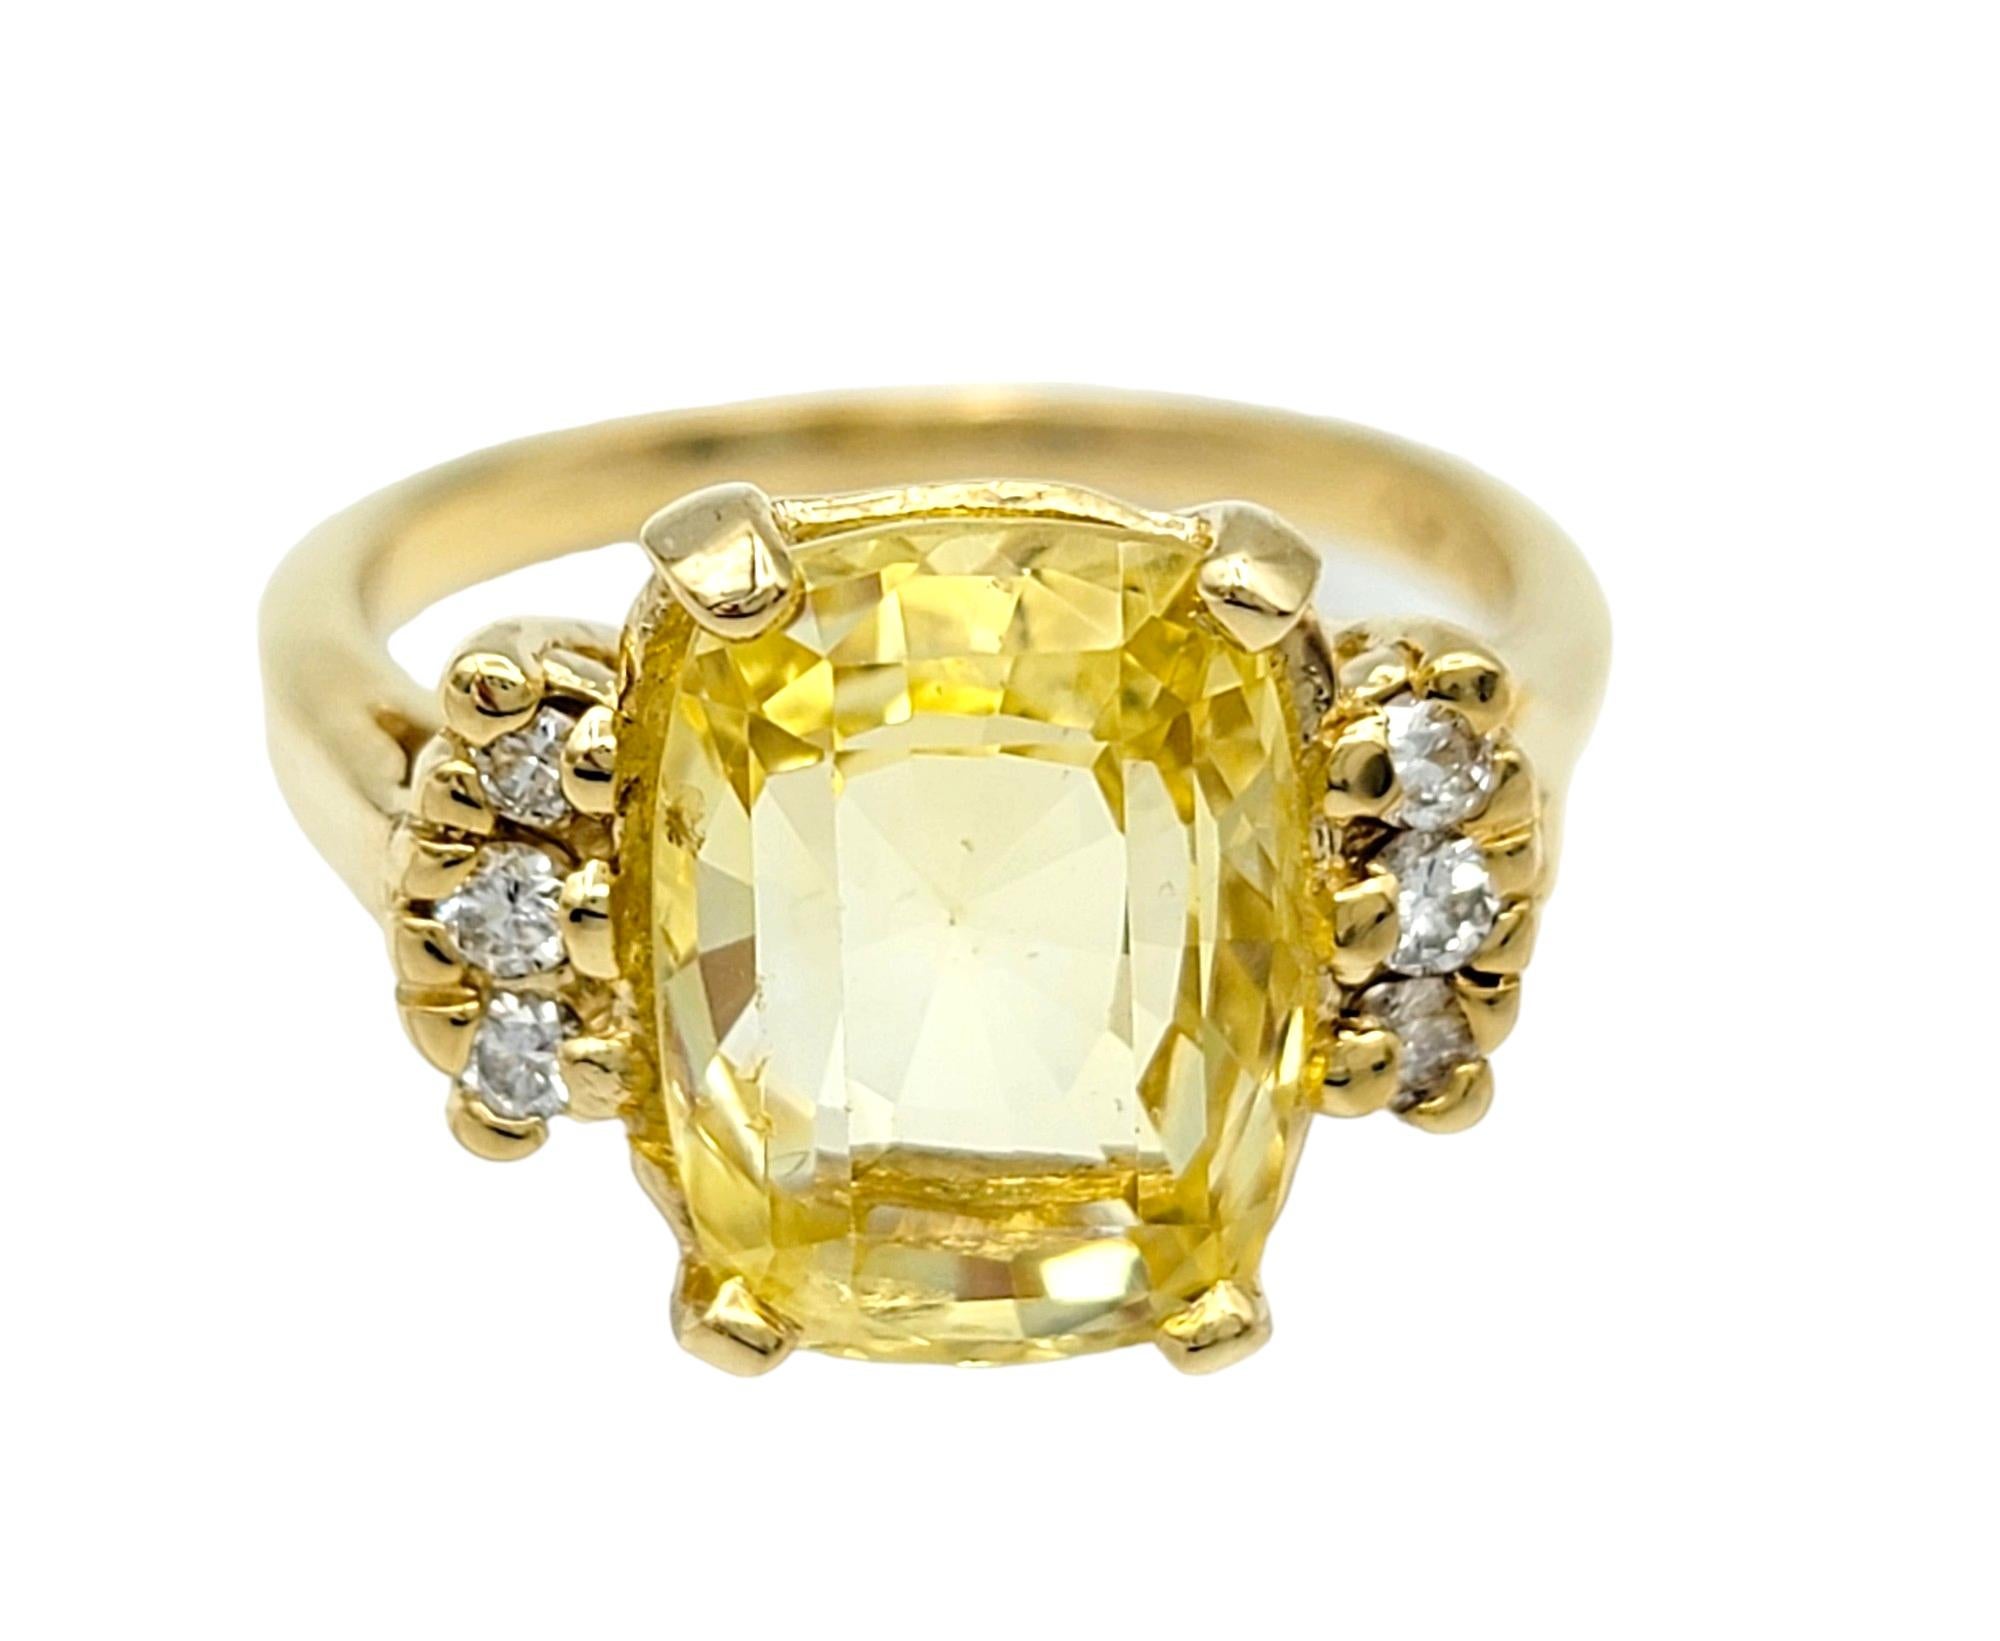 Cushion Cut Yellow Sapphire and Diamond Cocktail Ring in 14 Karat Yellow Gold In Good Condition For Sale In Scottsdale, AZ